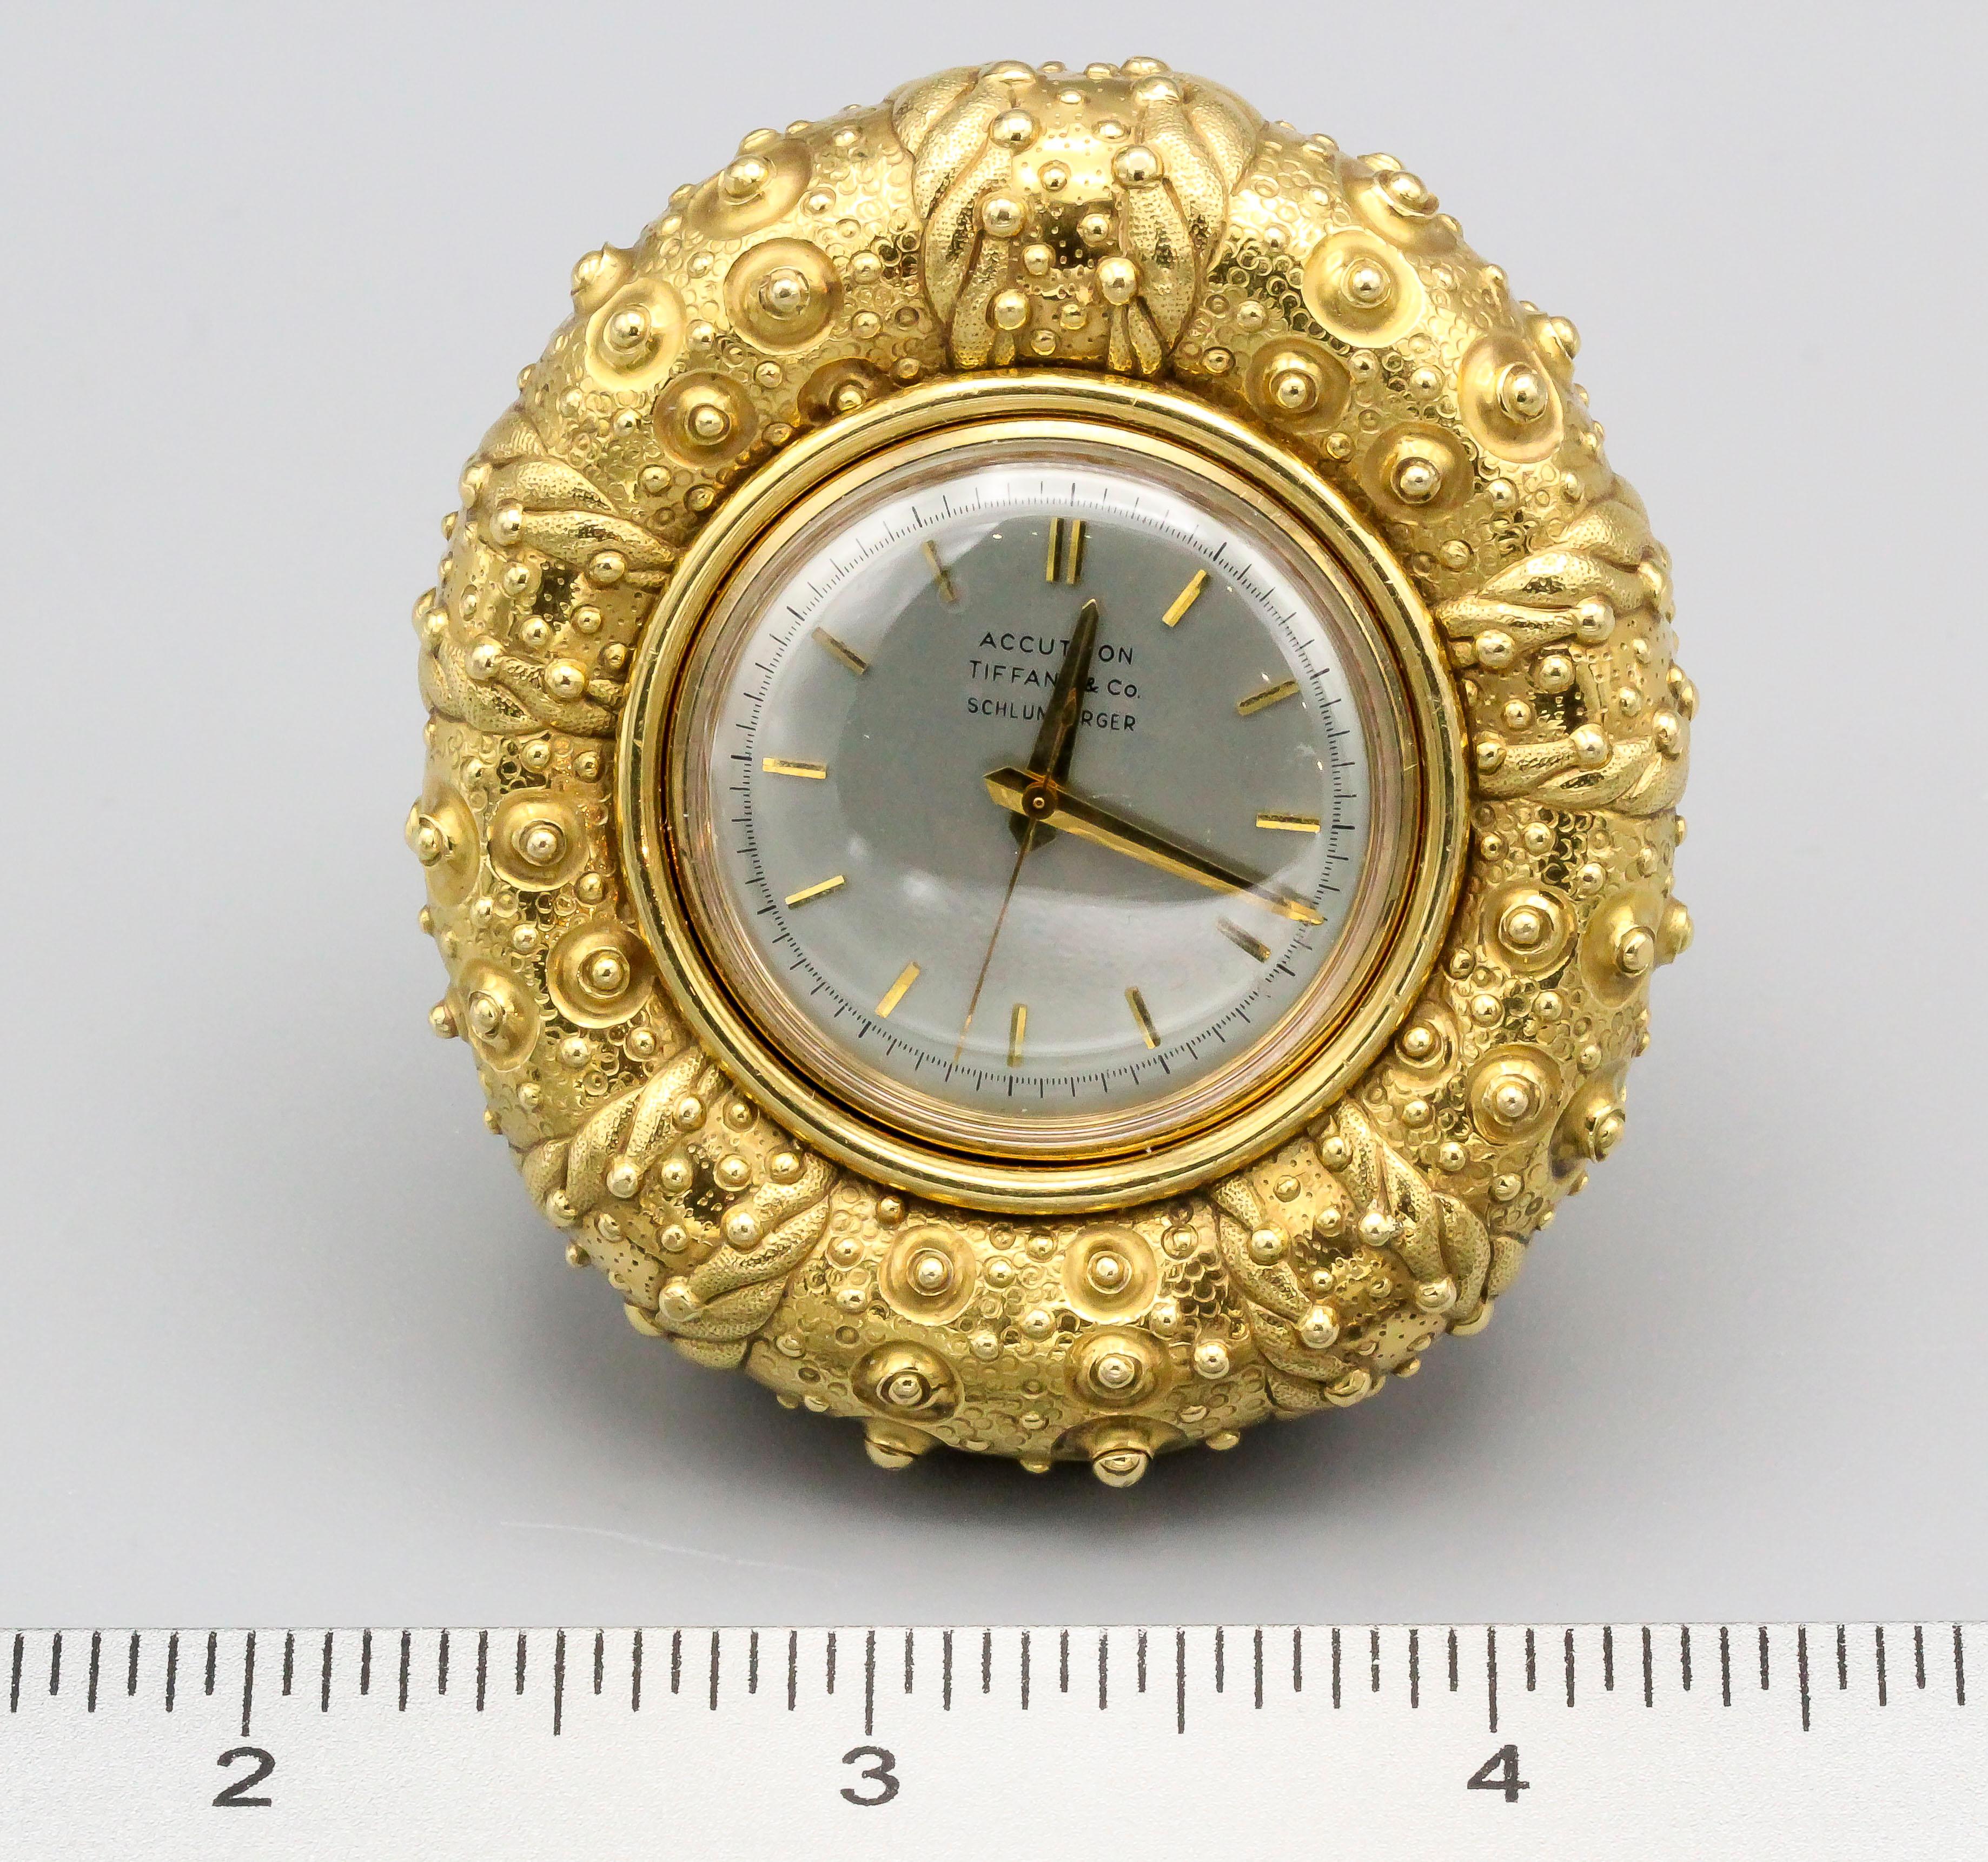 Tiffany & Co. Schlumberger 18 Karat Gold Sea Urchin Clock In Good Condition For Sale In New York, NY